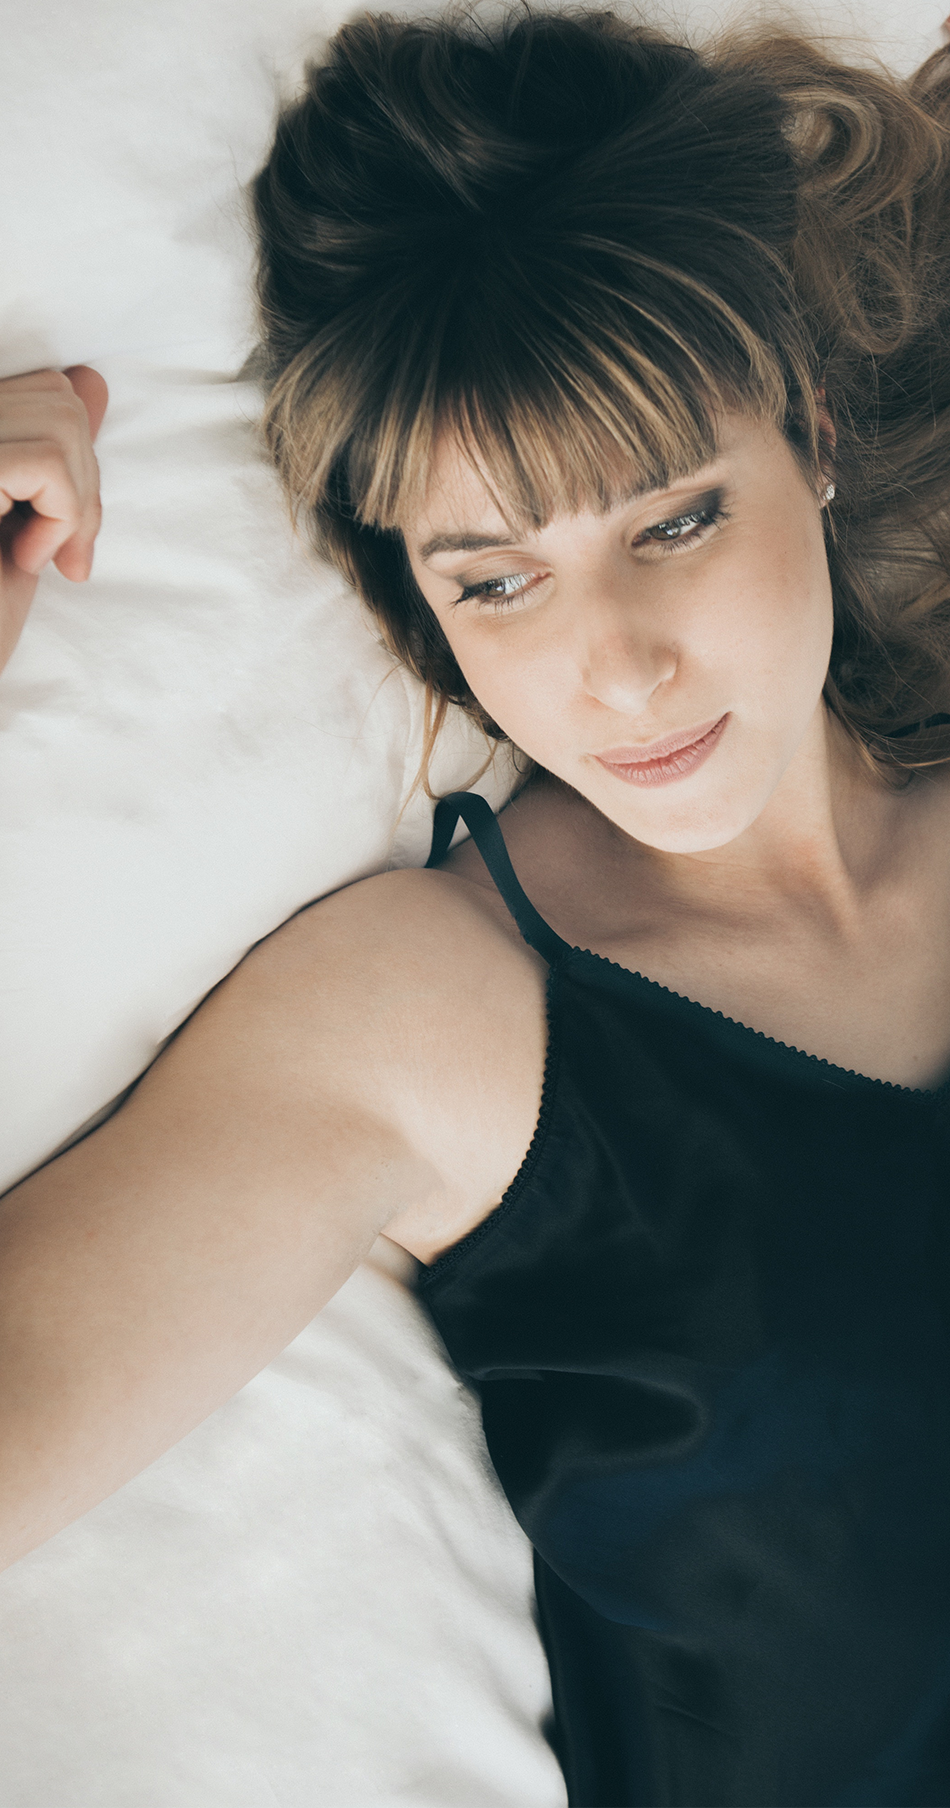 Woman lying in bed thinking about ovarian reserve